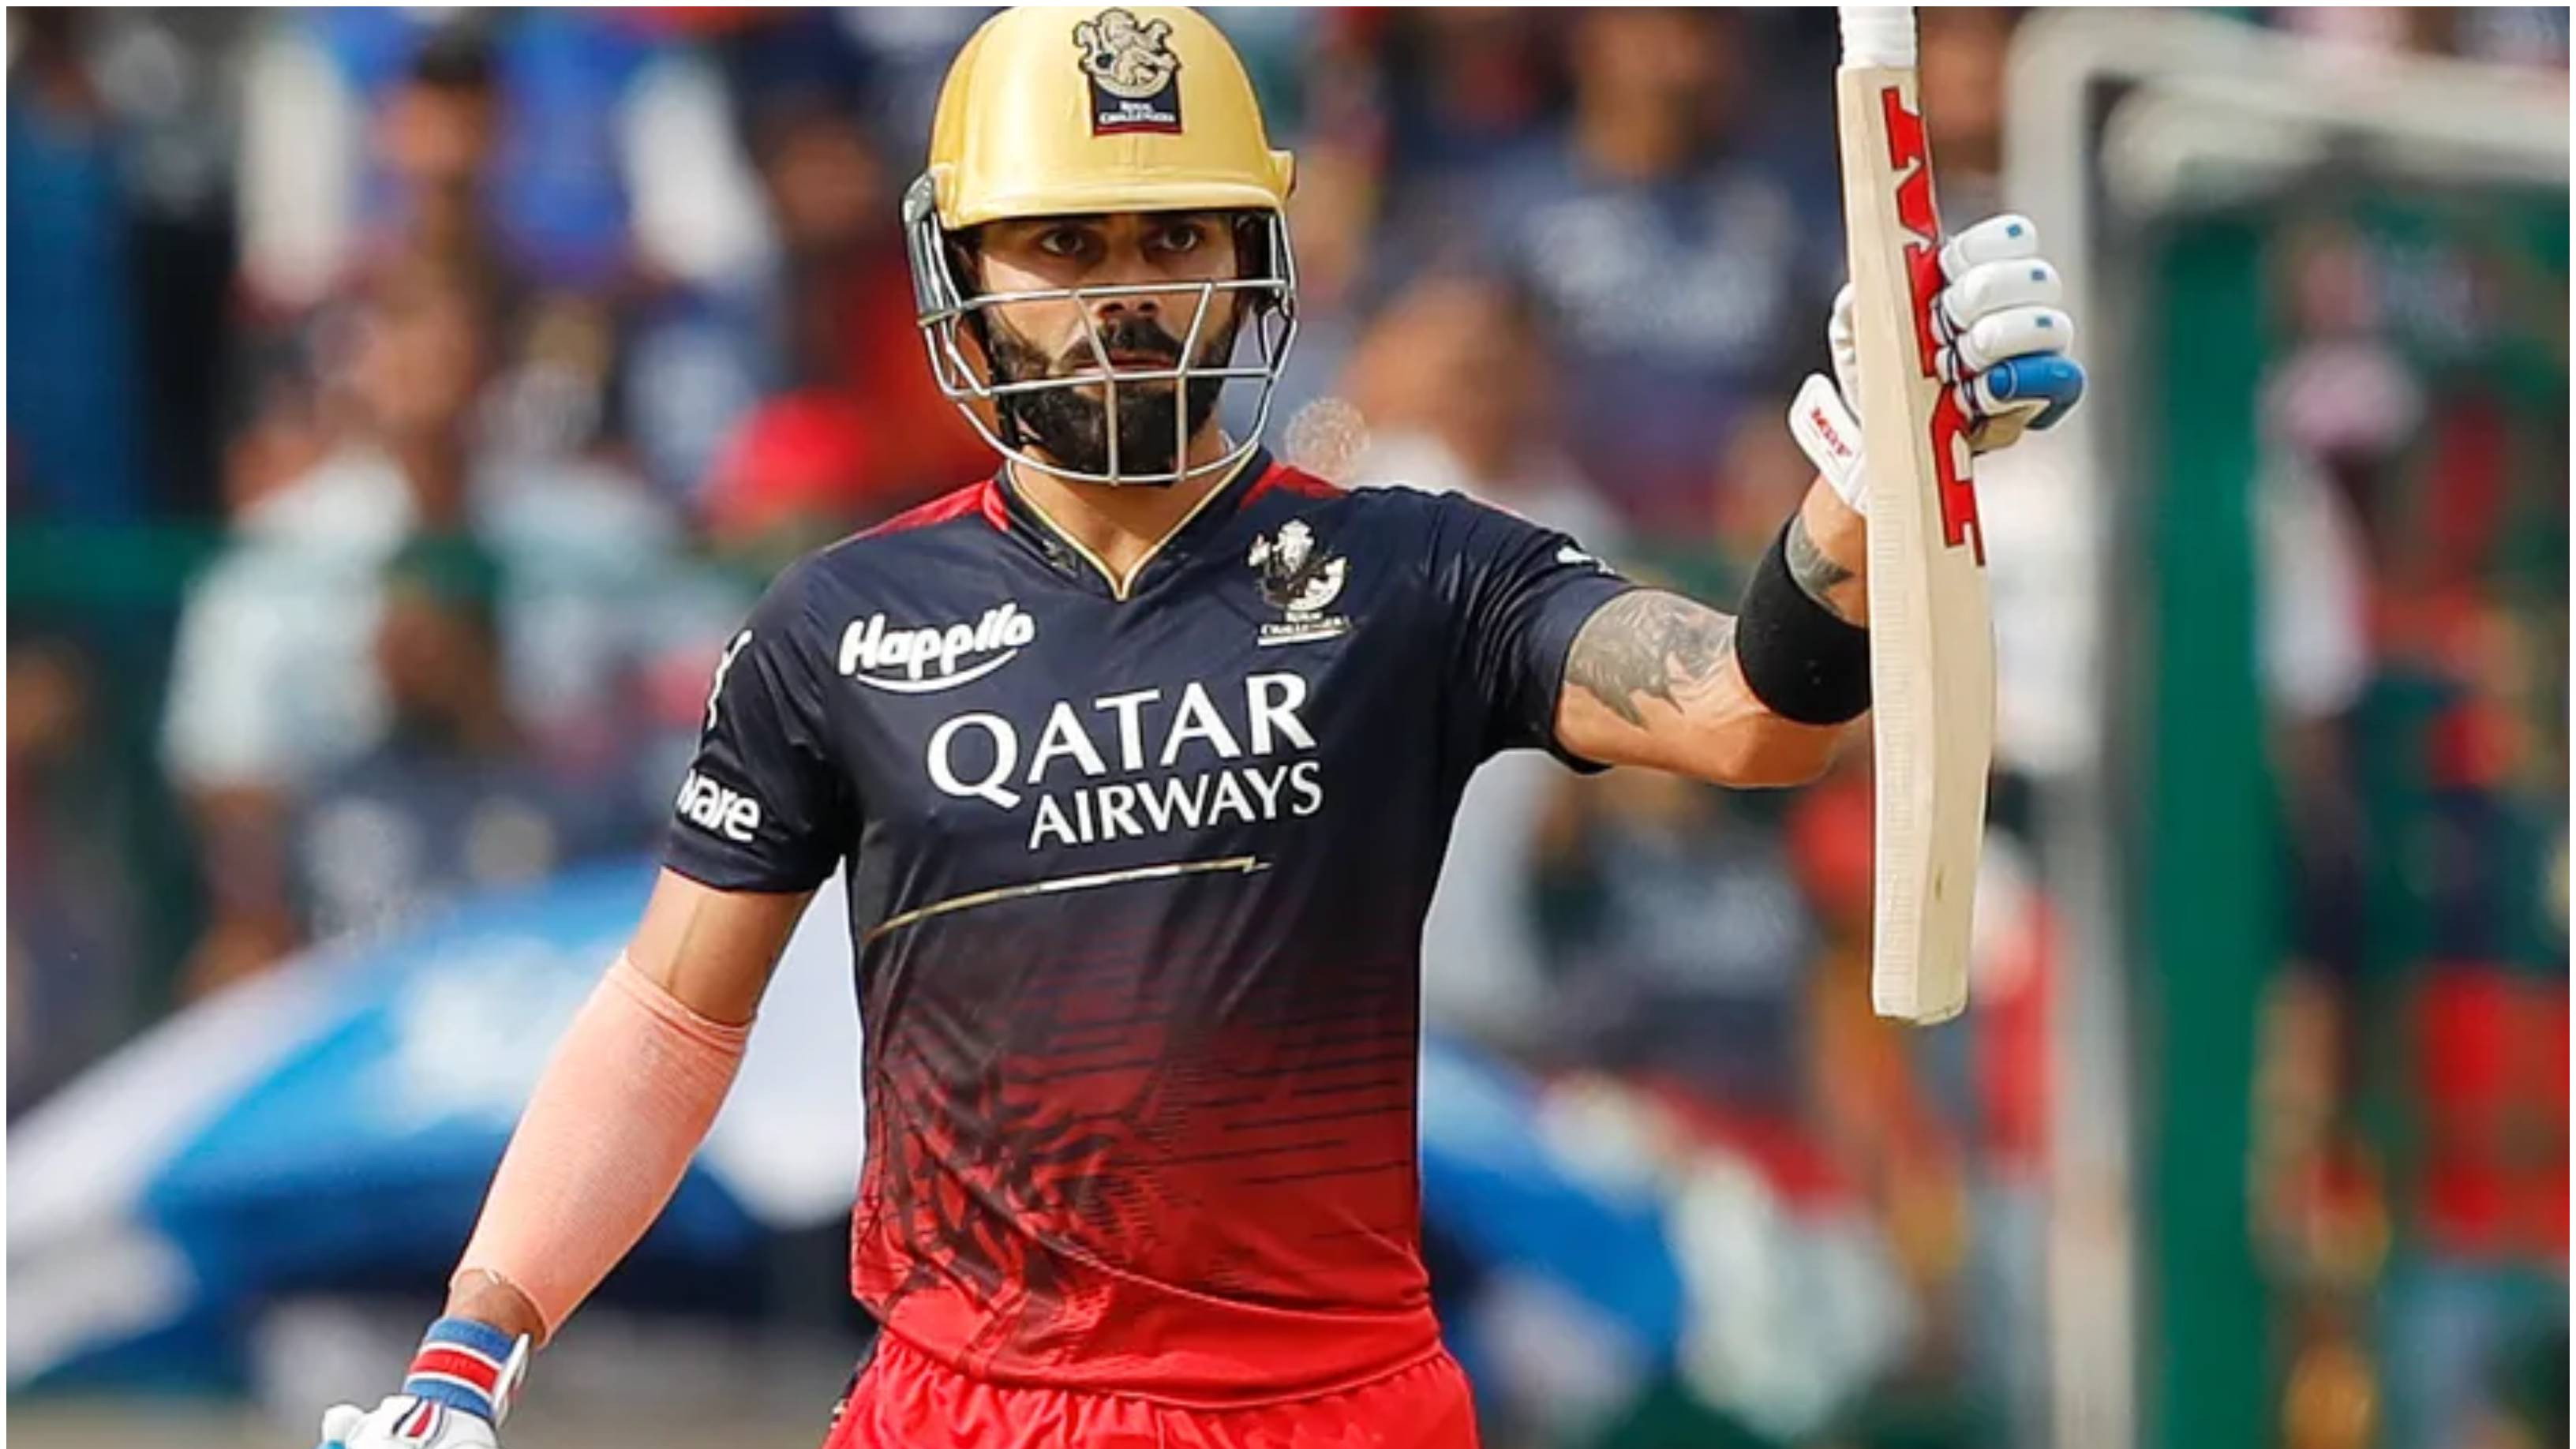 IPL 2023: Kohli wanted to become Indian cricketer, marry an actress – RCB star's childhood wishes revealed